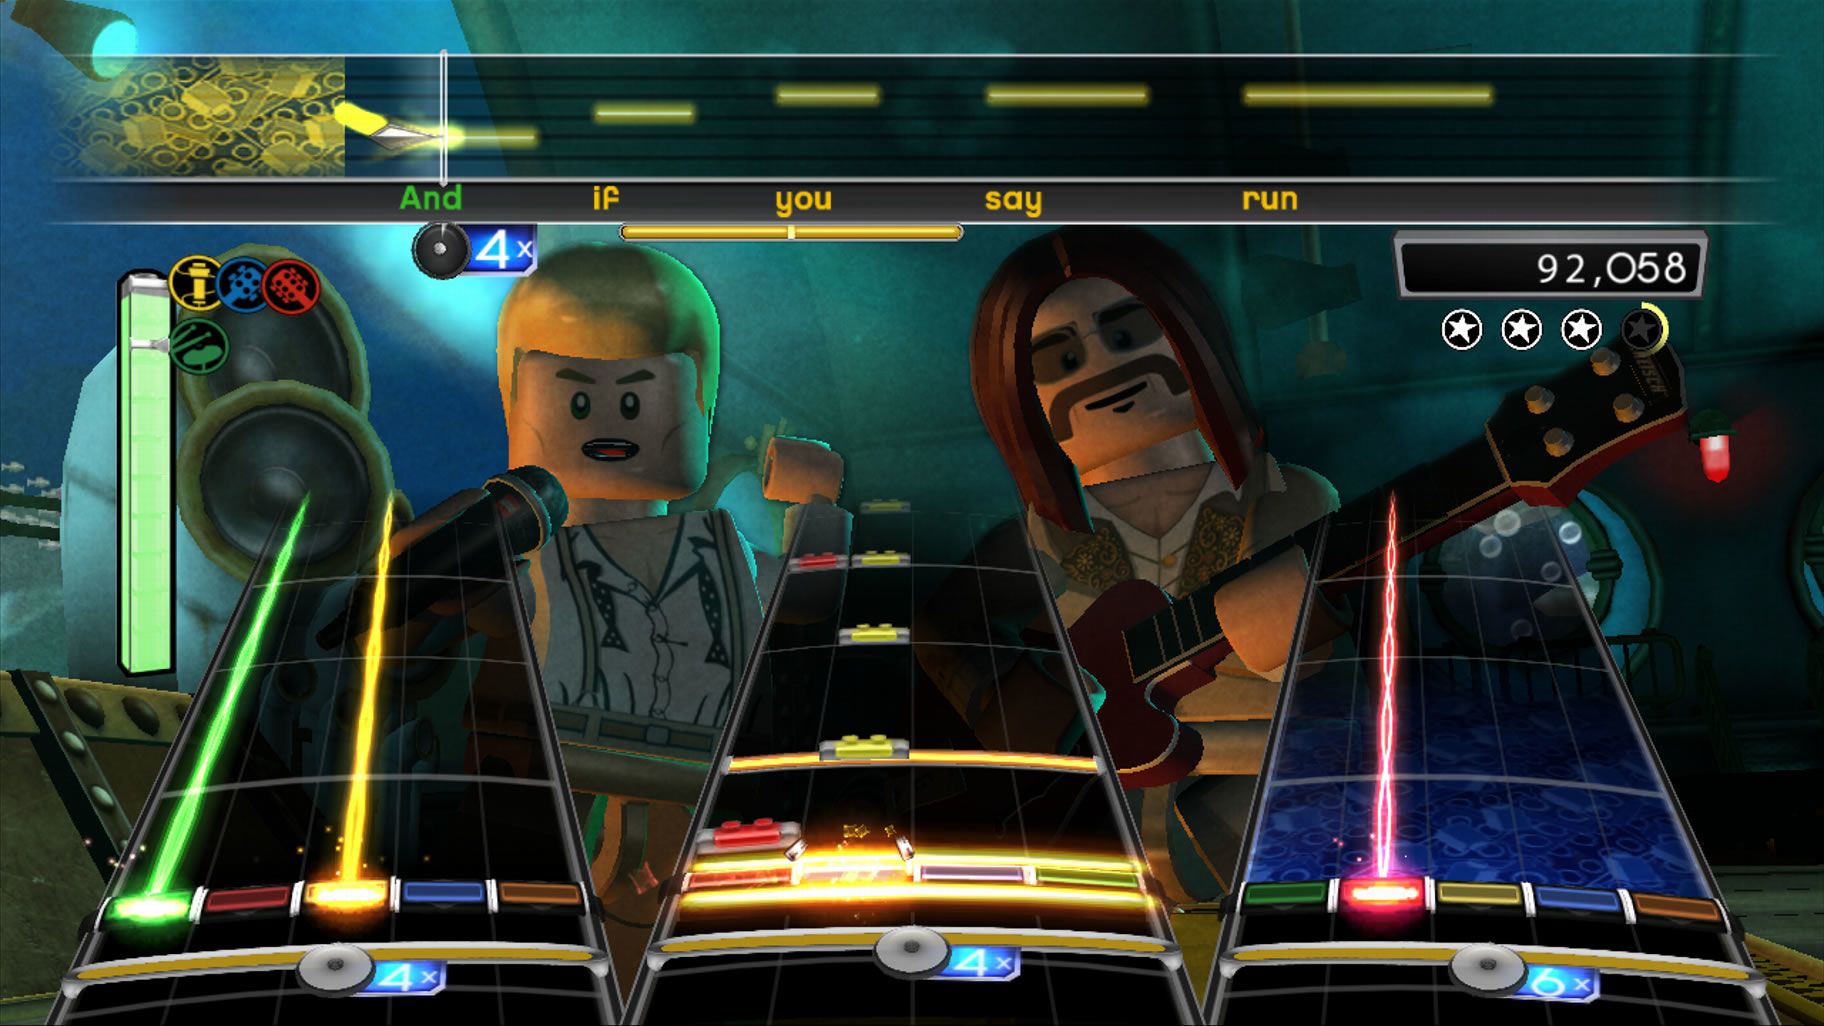 Lego Rock Band - Bowie (1)